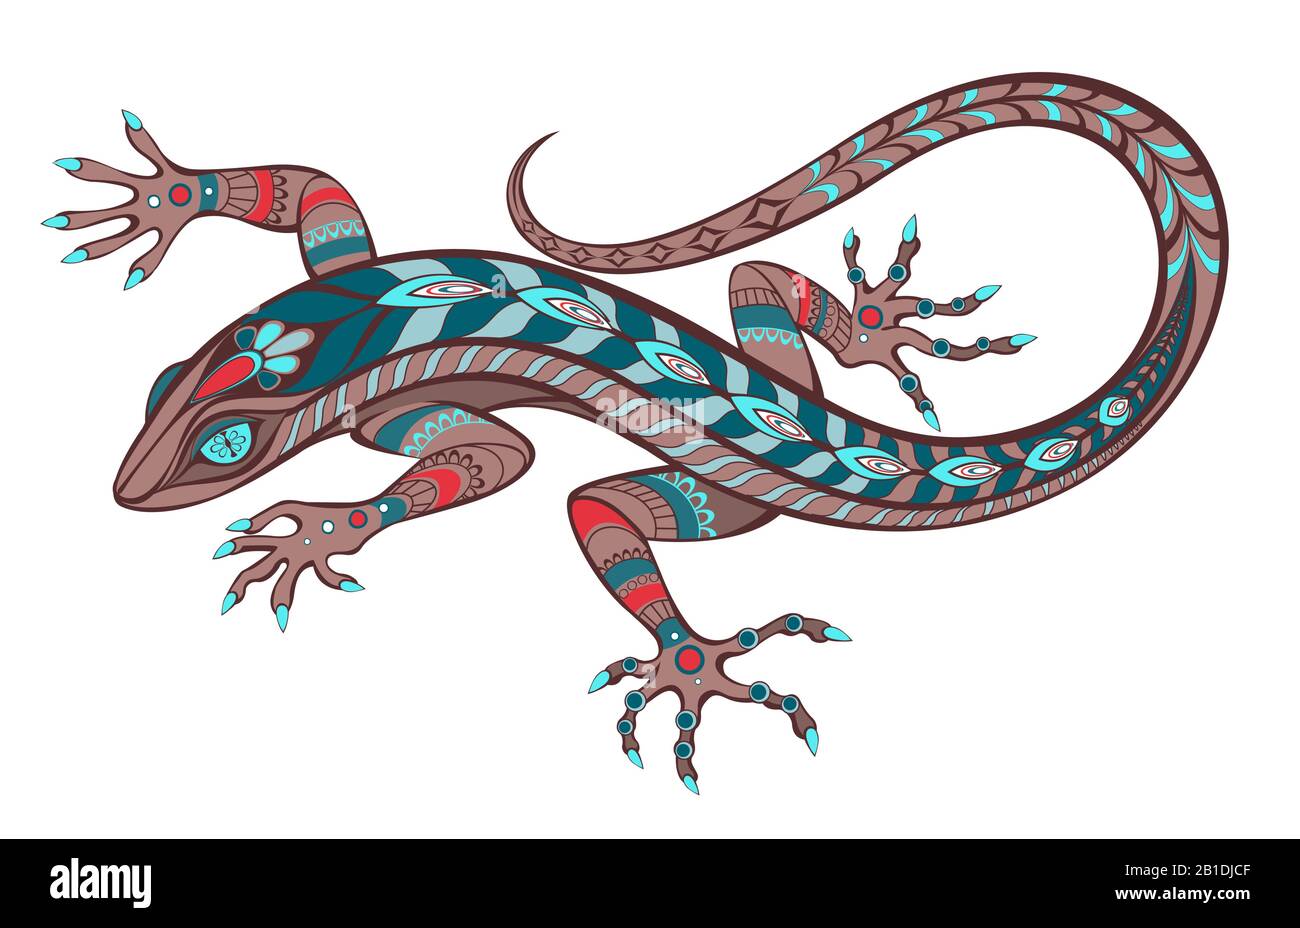 Patterned, artistic, exotic, bright lizard, decorated with turquoise, brown and red on white background. Tattoo style. Stock Vector